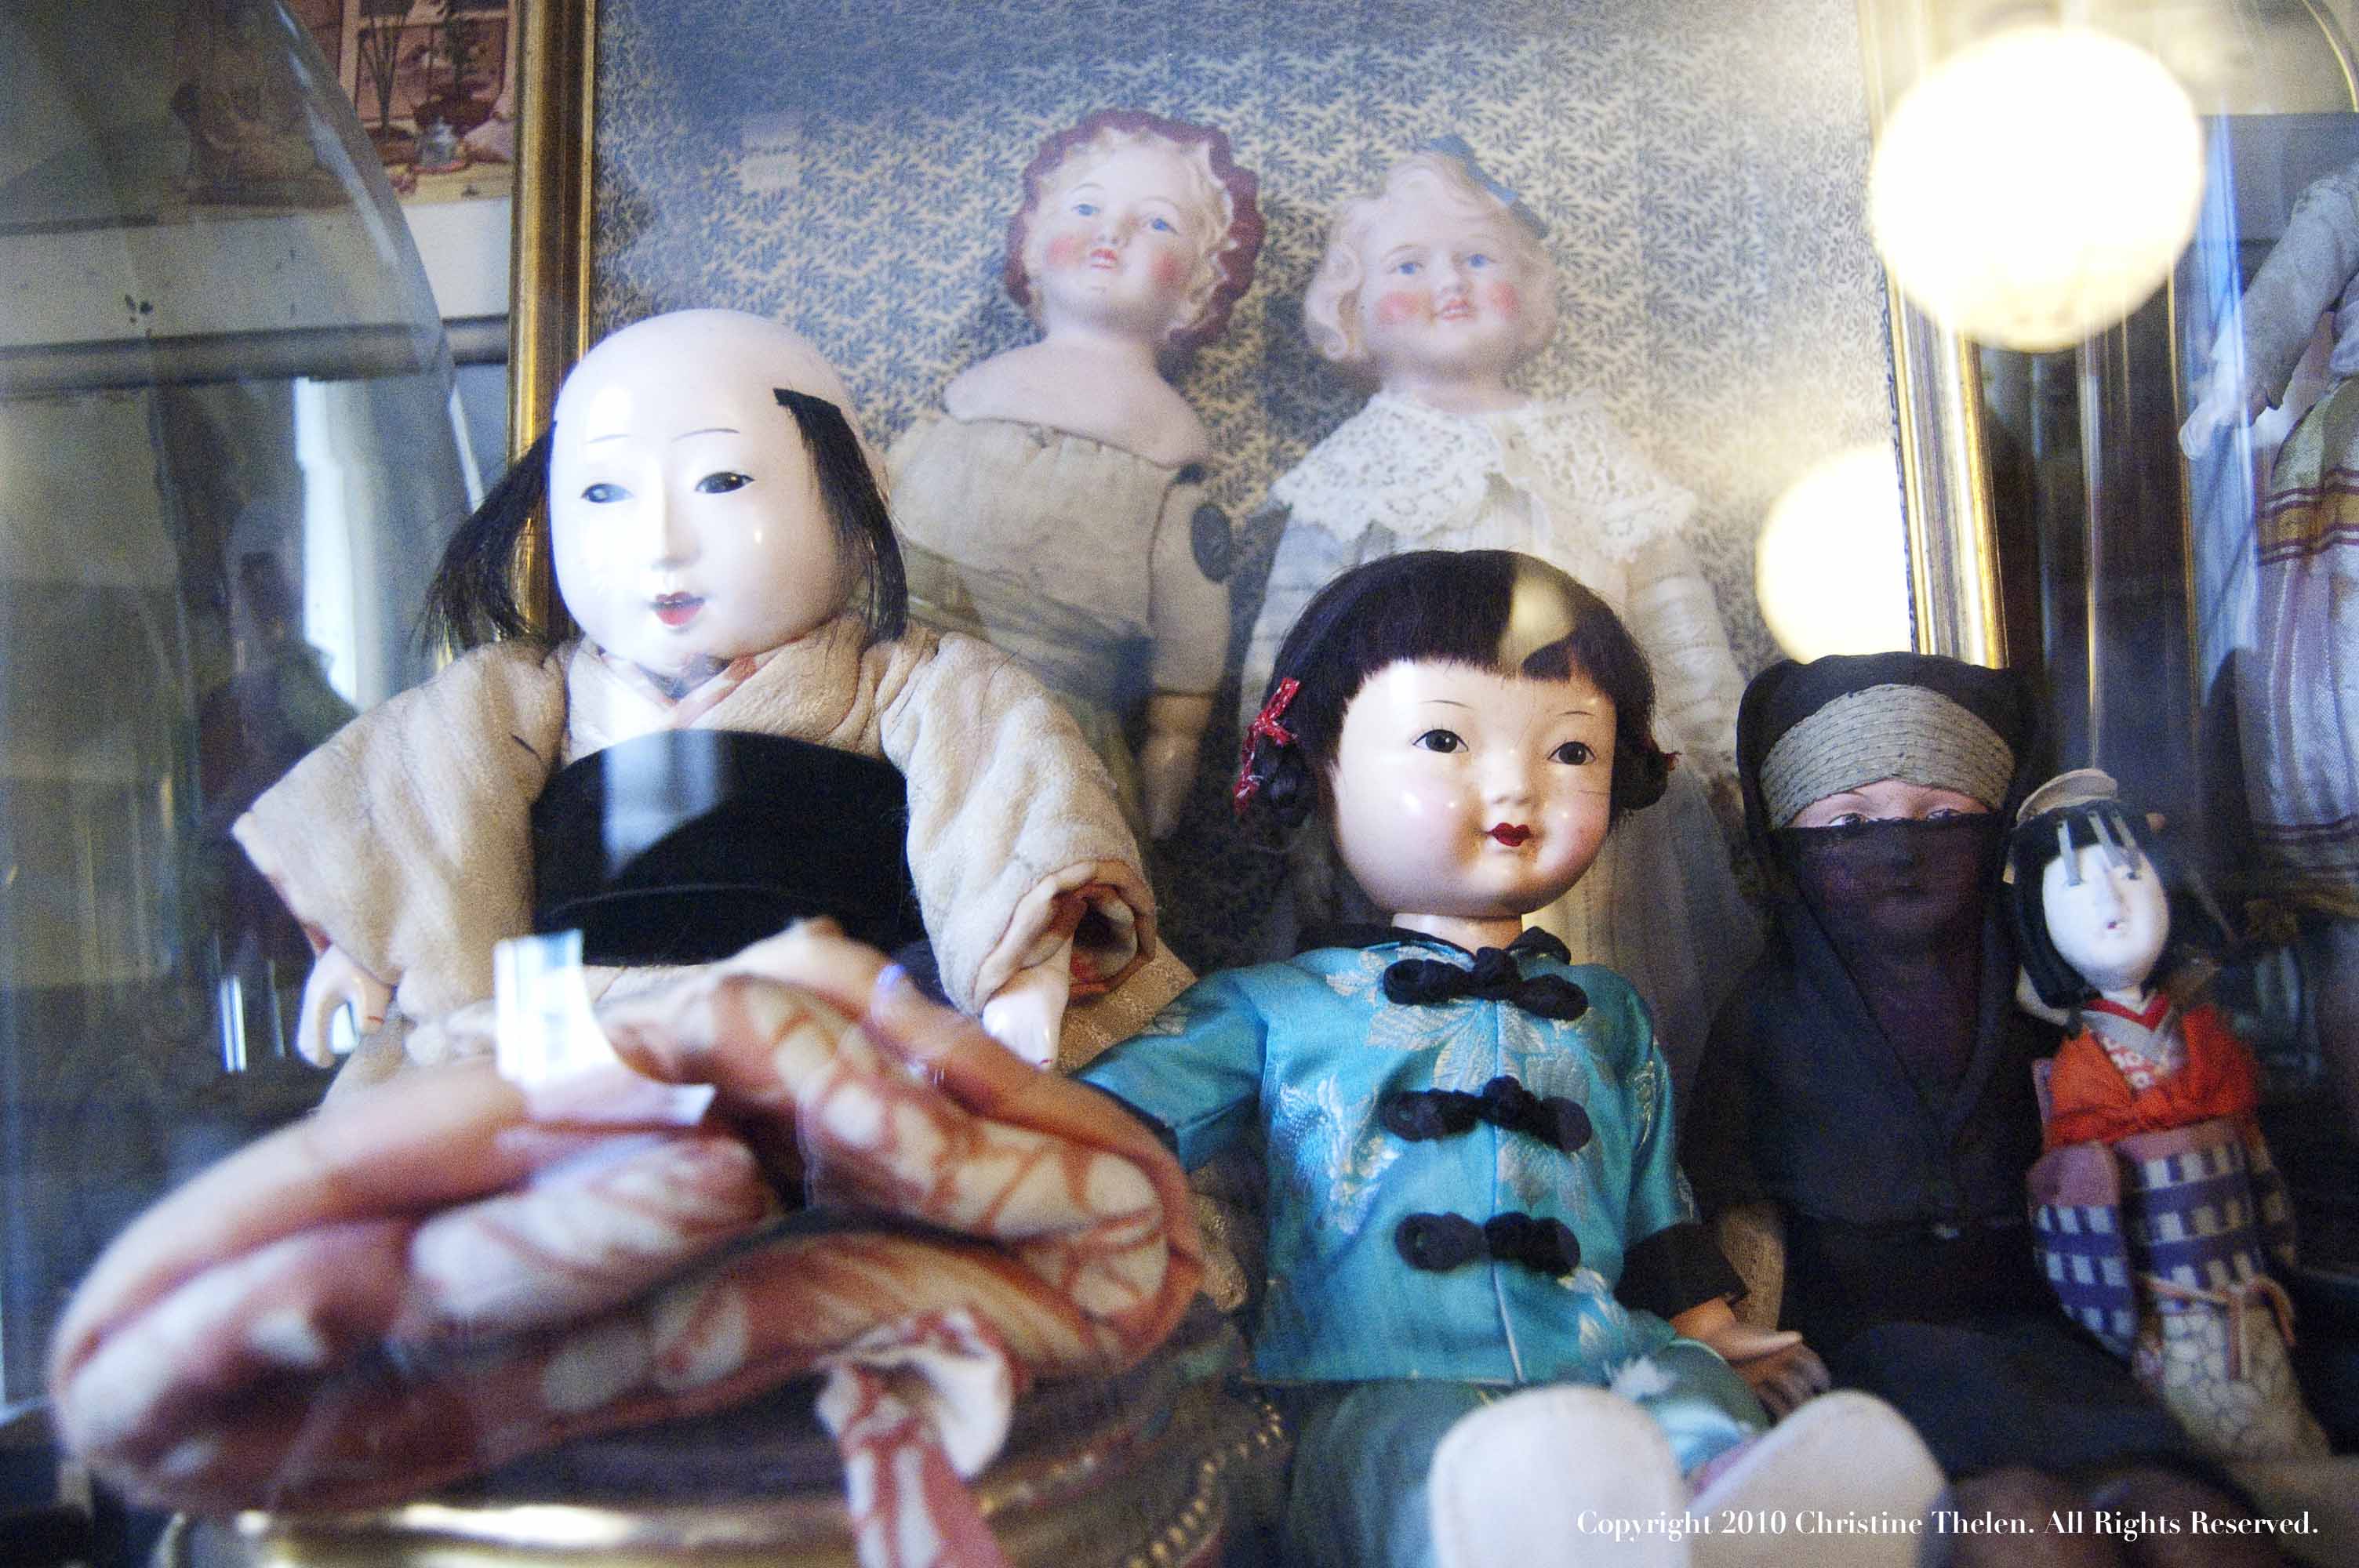 Wax Doll Collection - Pollock's Toy Museum - Atlas Obscura Blog